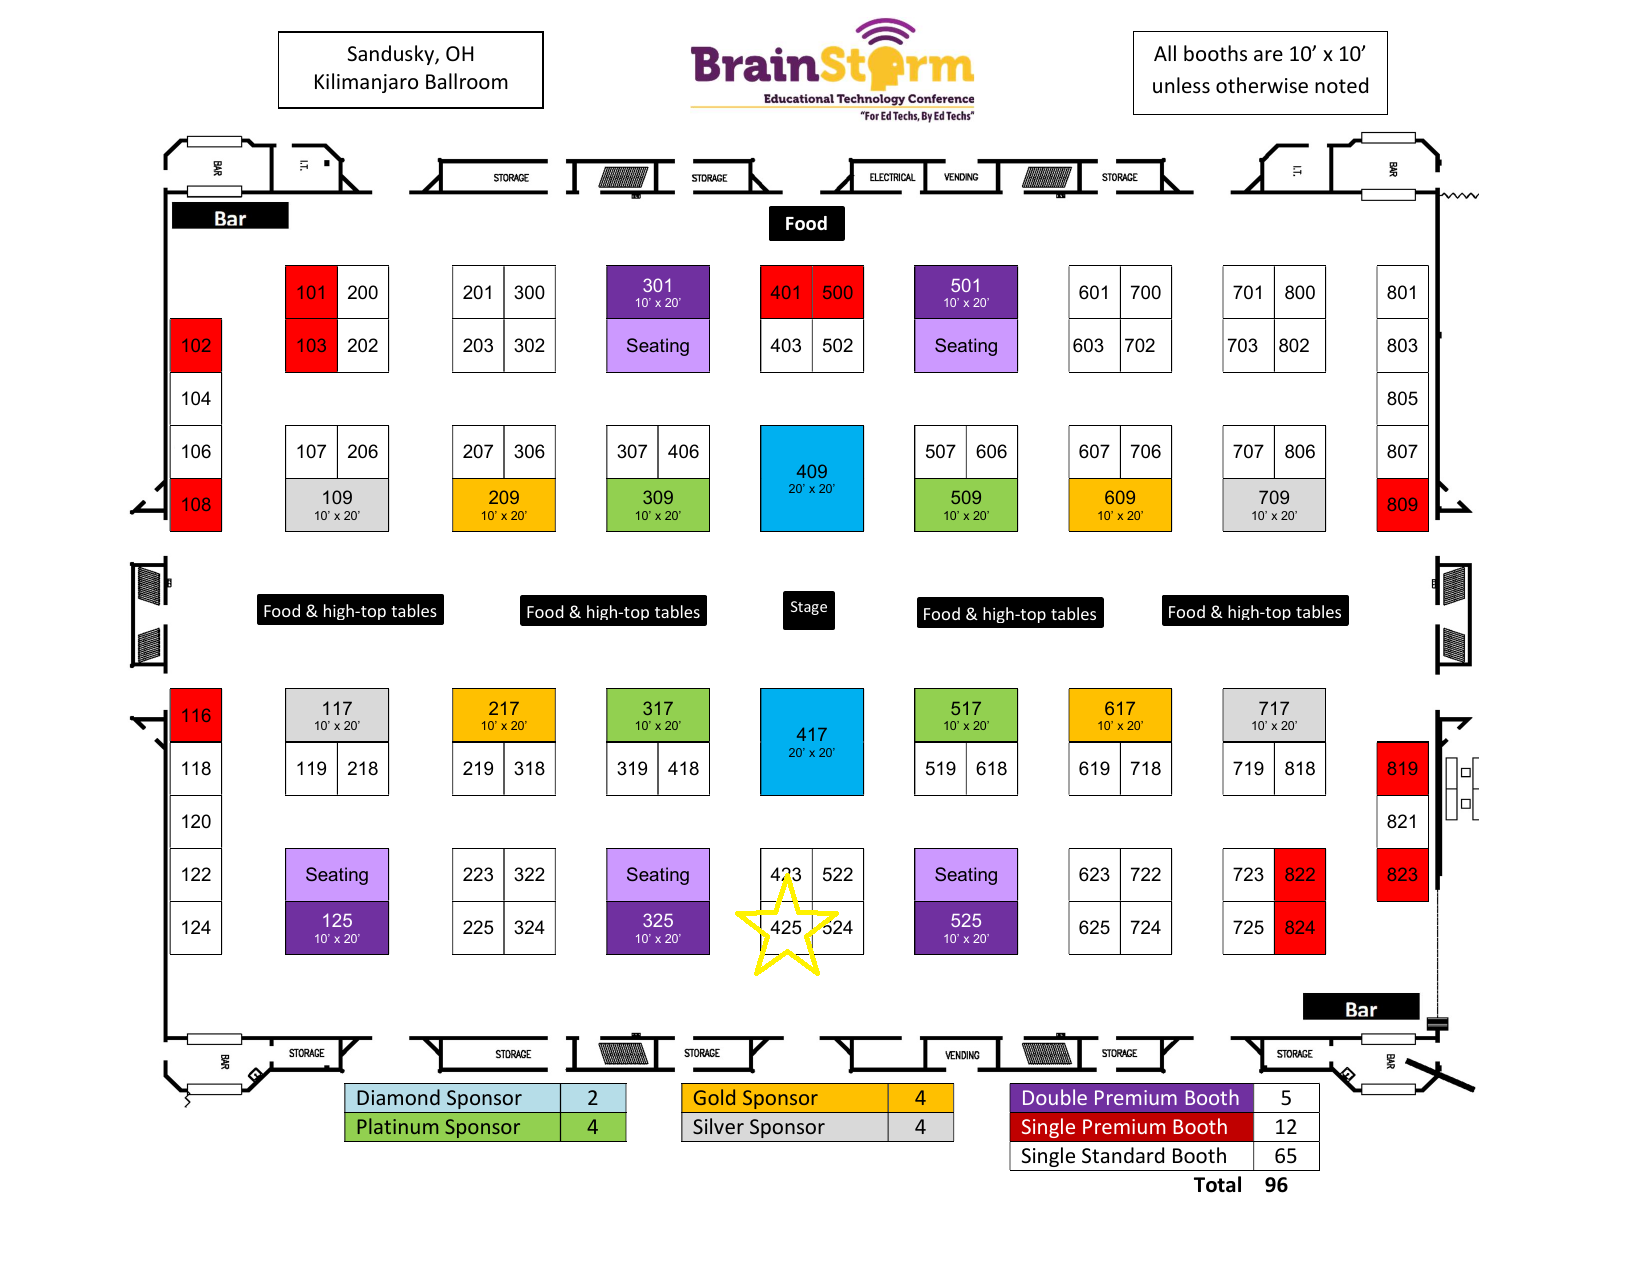 brainstorm-exhibitor-booth-map